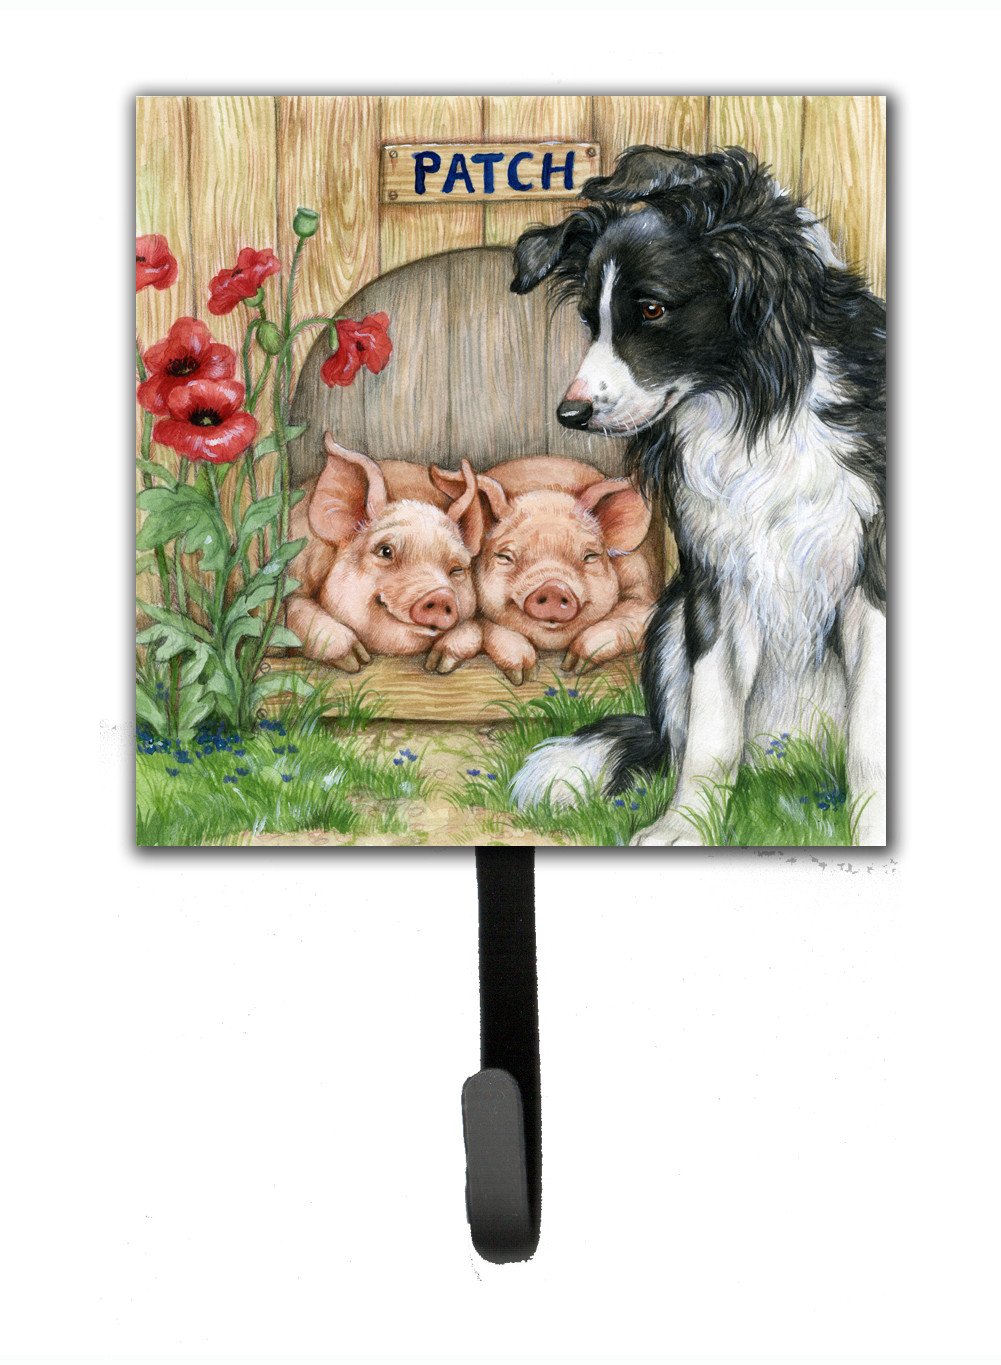 Patch the Border Collie and Piglet Friends Leash or Key Holder CDCO0362SH4 by Caroline's Treasures